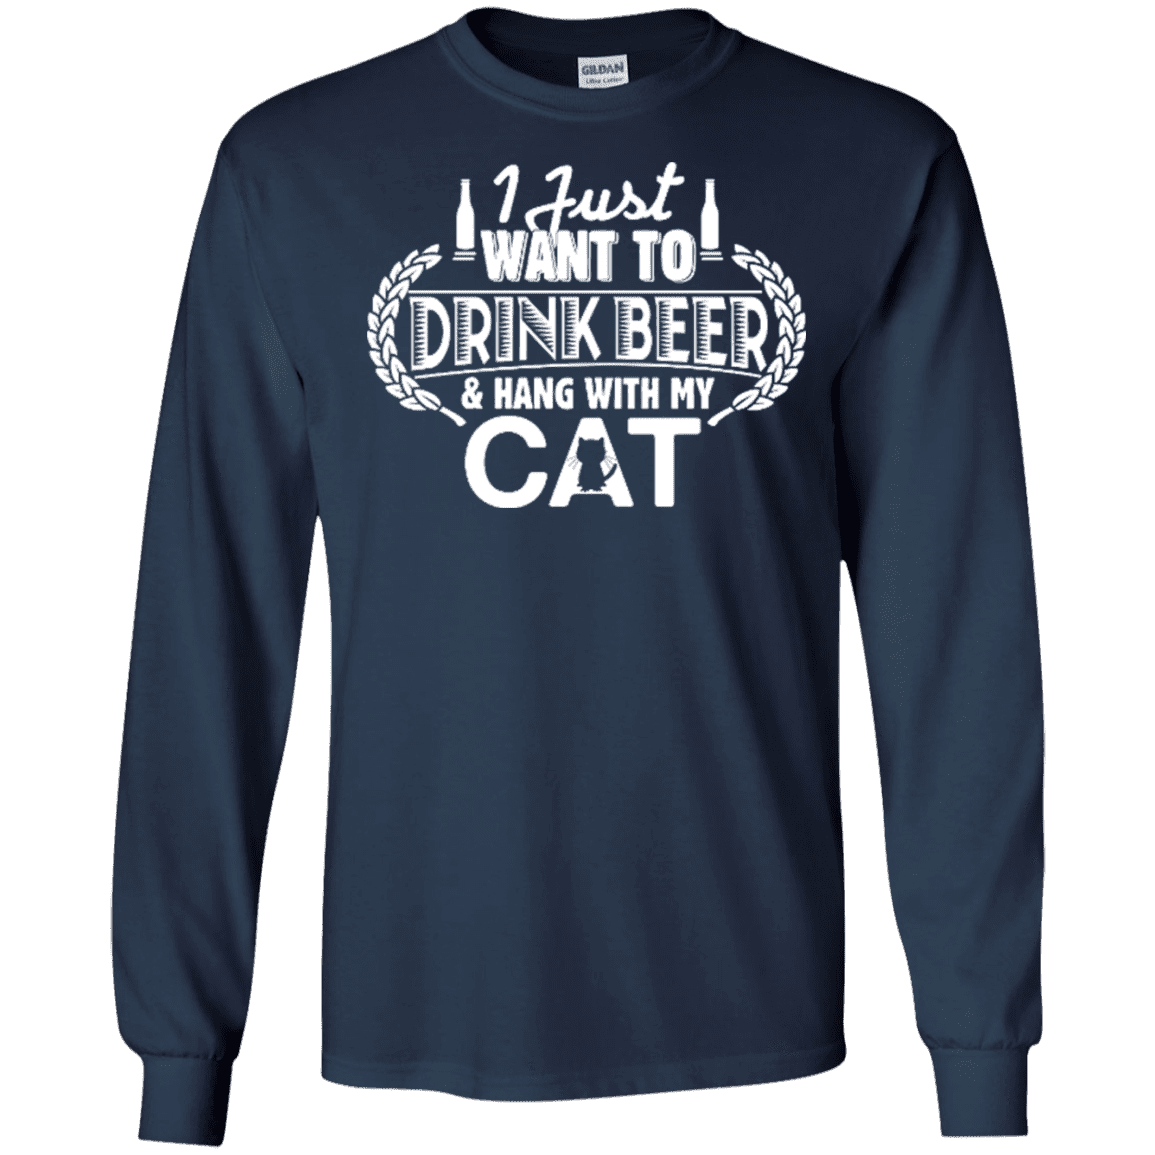 Drink Beer Hang With My Cat - Long Sleeve T Shirt.